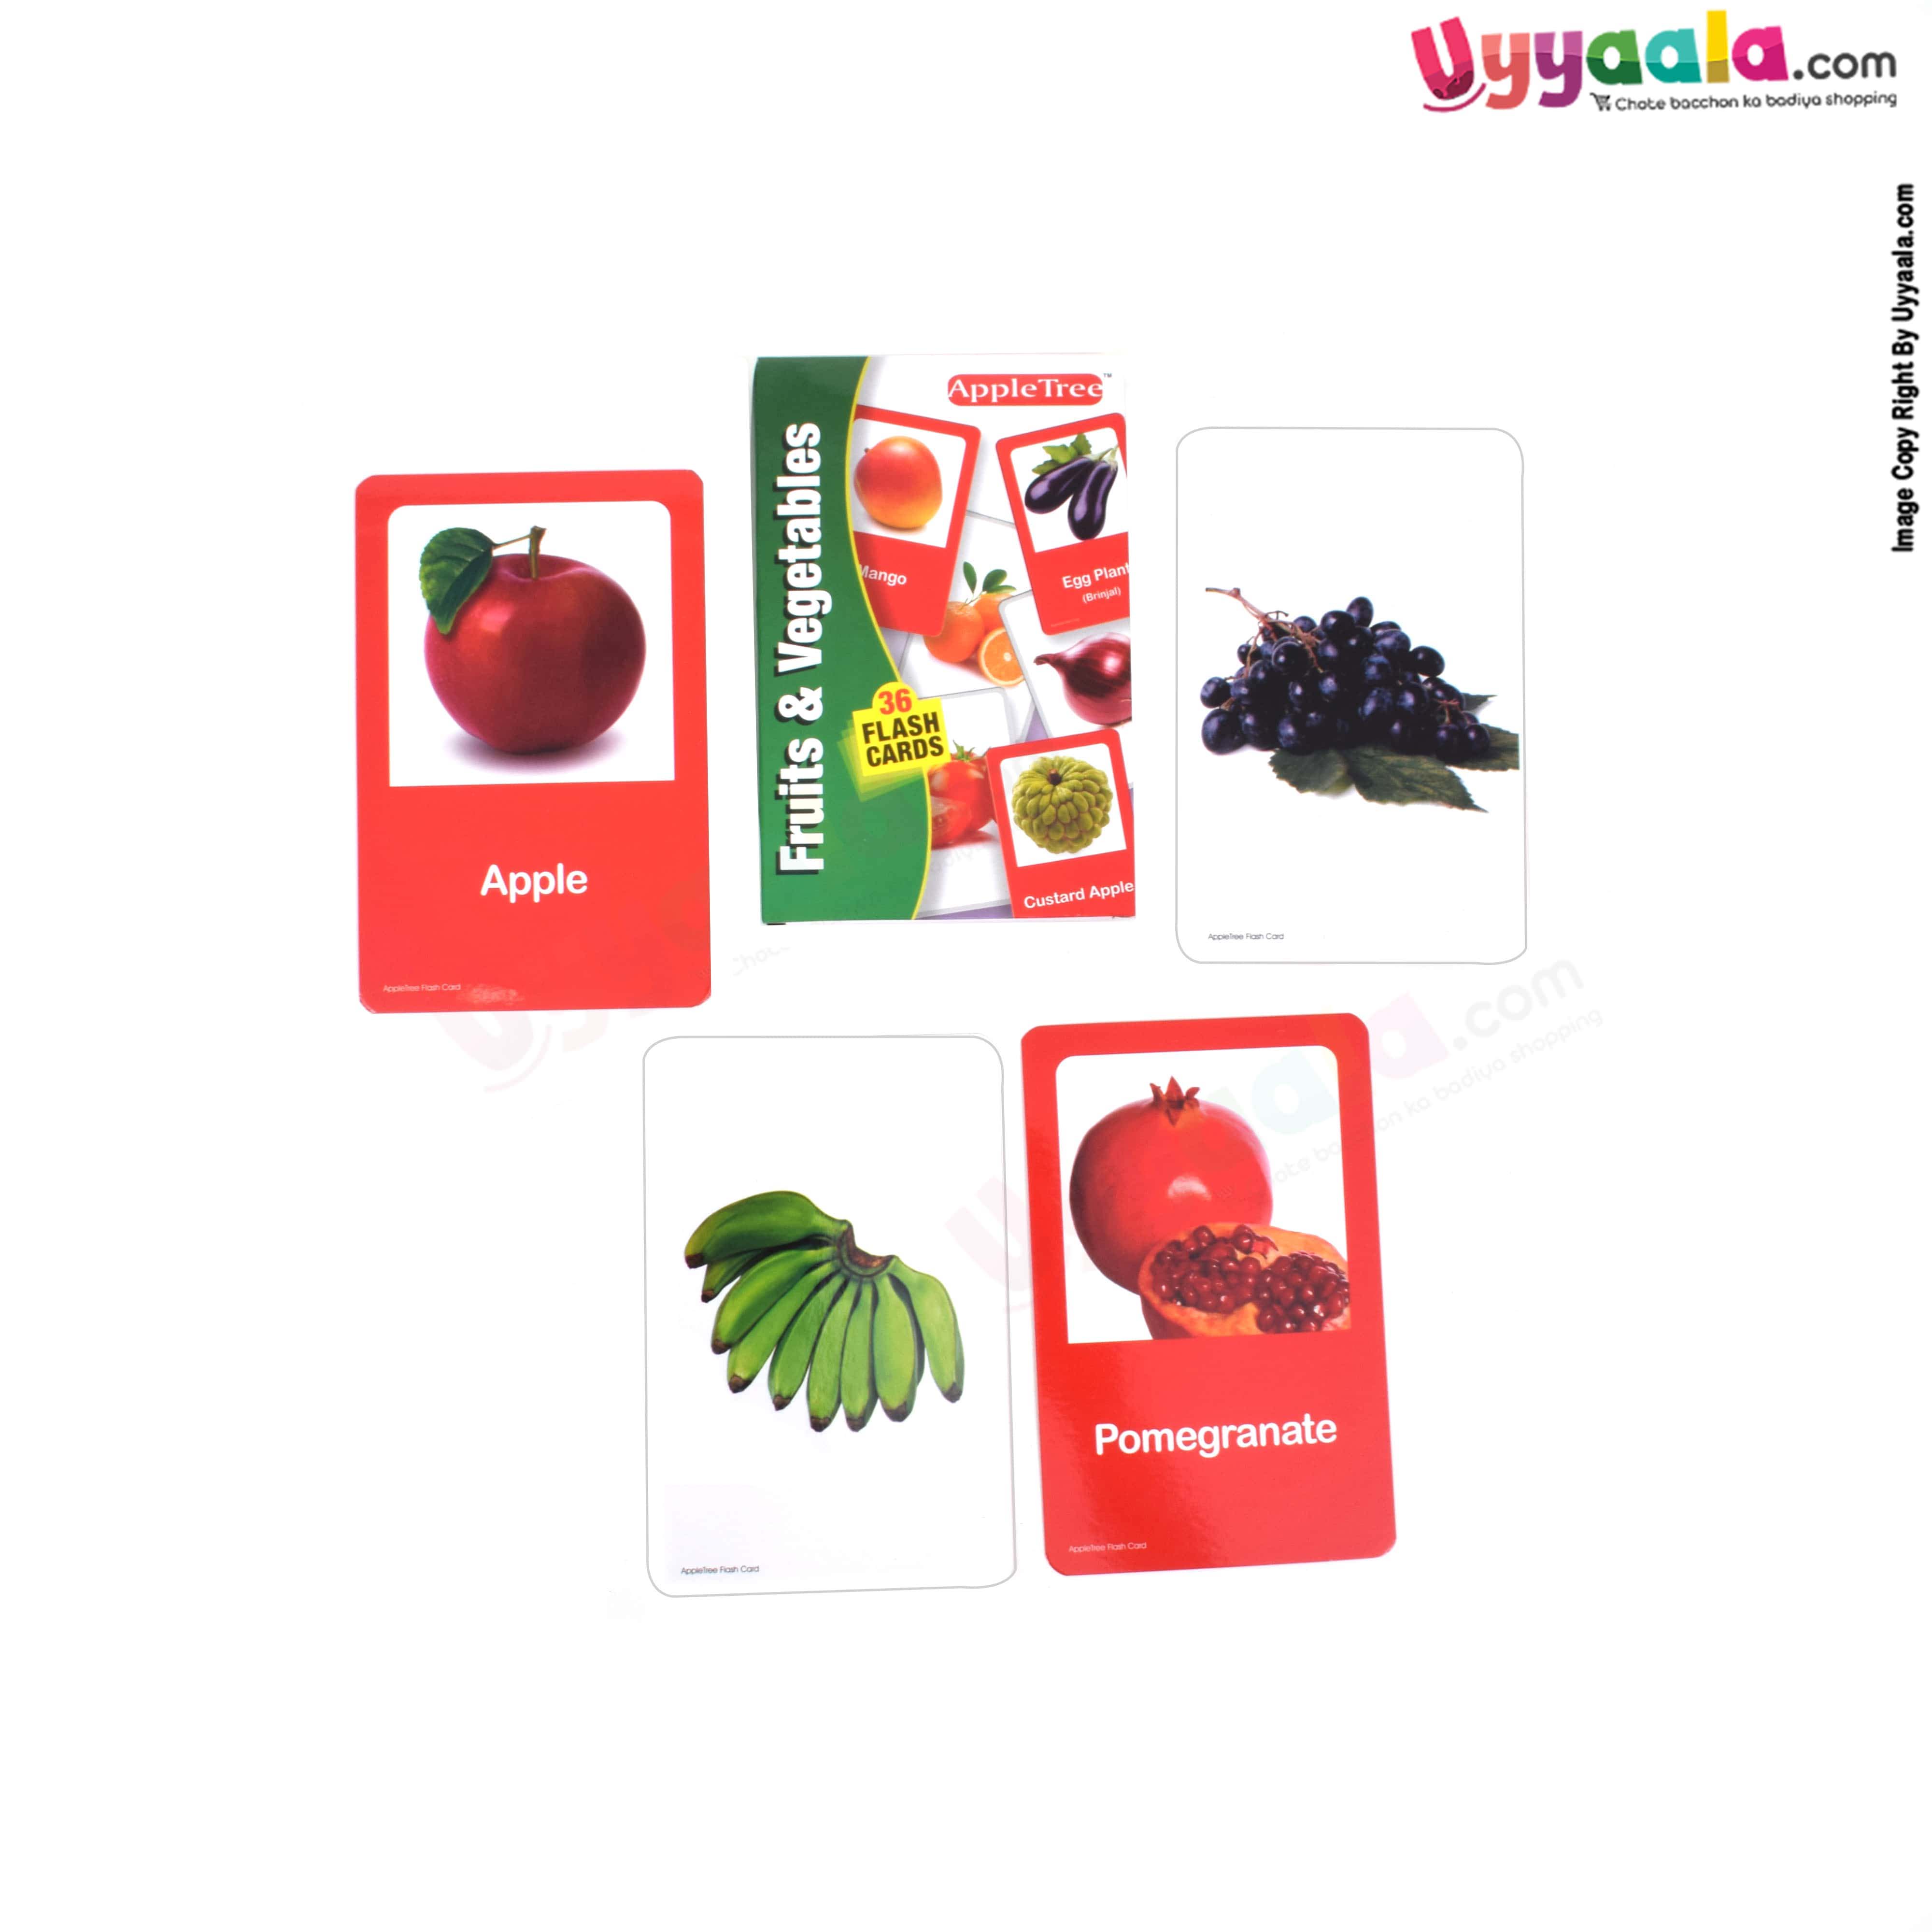 Flash cards for children's